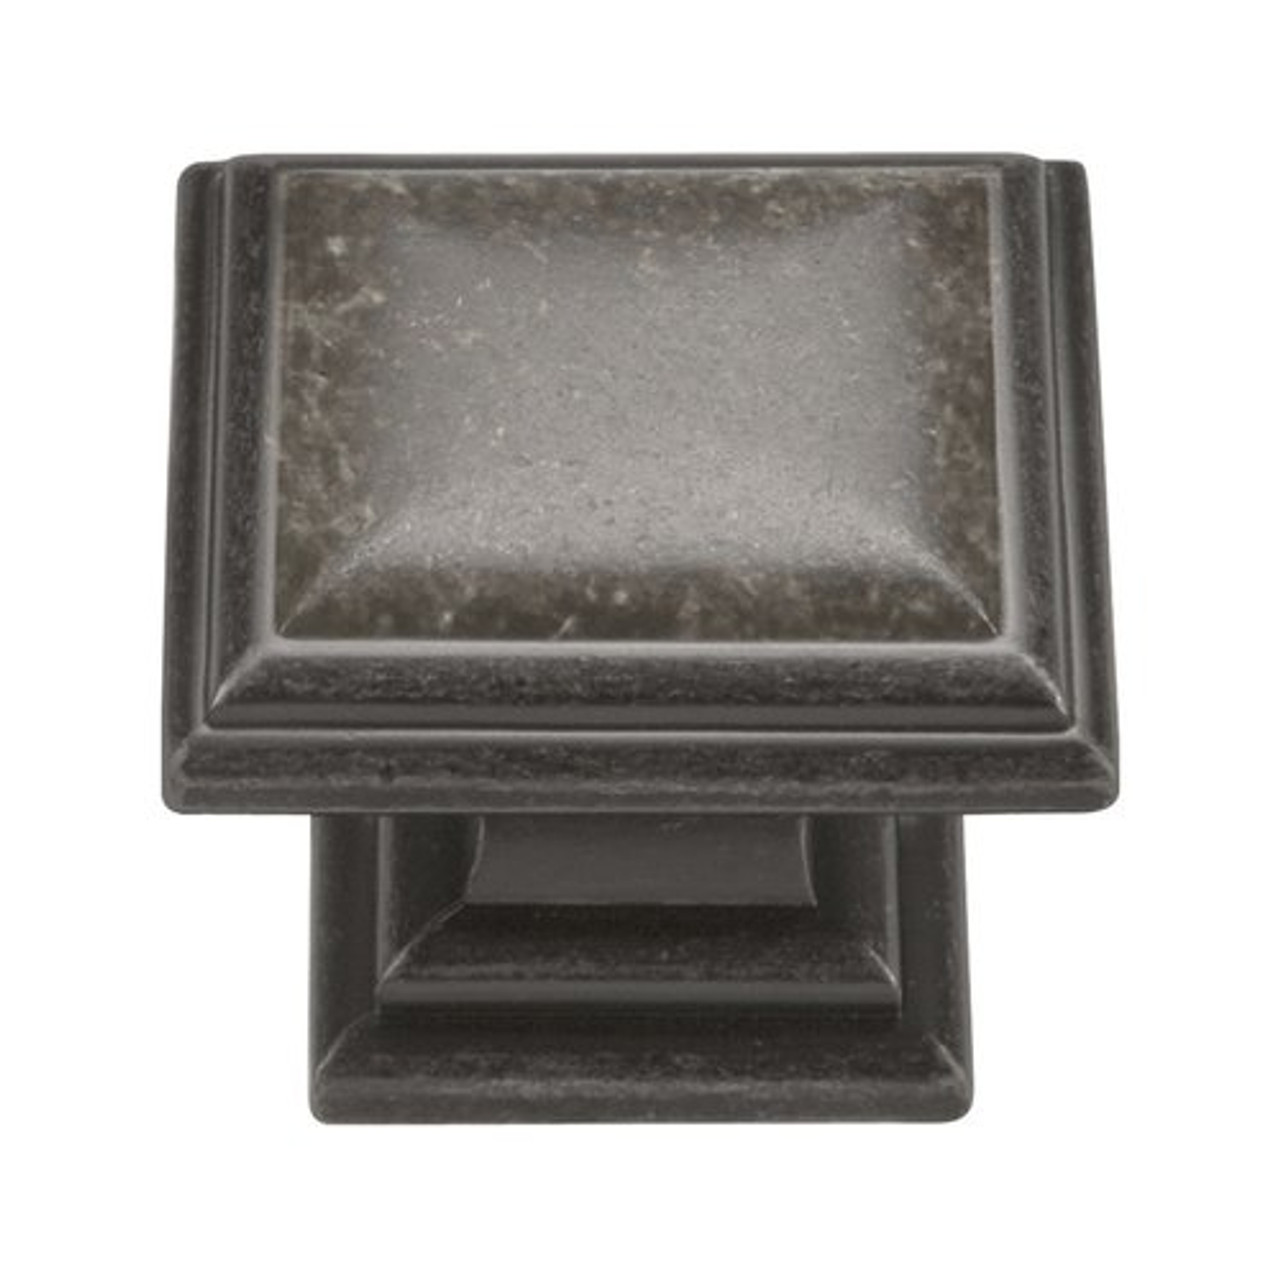 Hickory Hardware 1-1/8" or  1-5/16 INCH Square SOMERSET CABINET KNOB